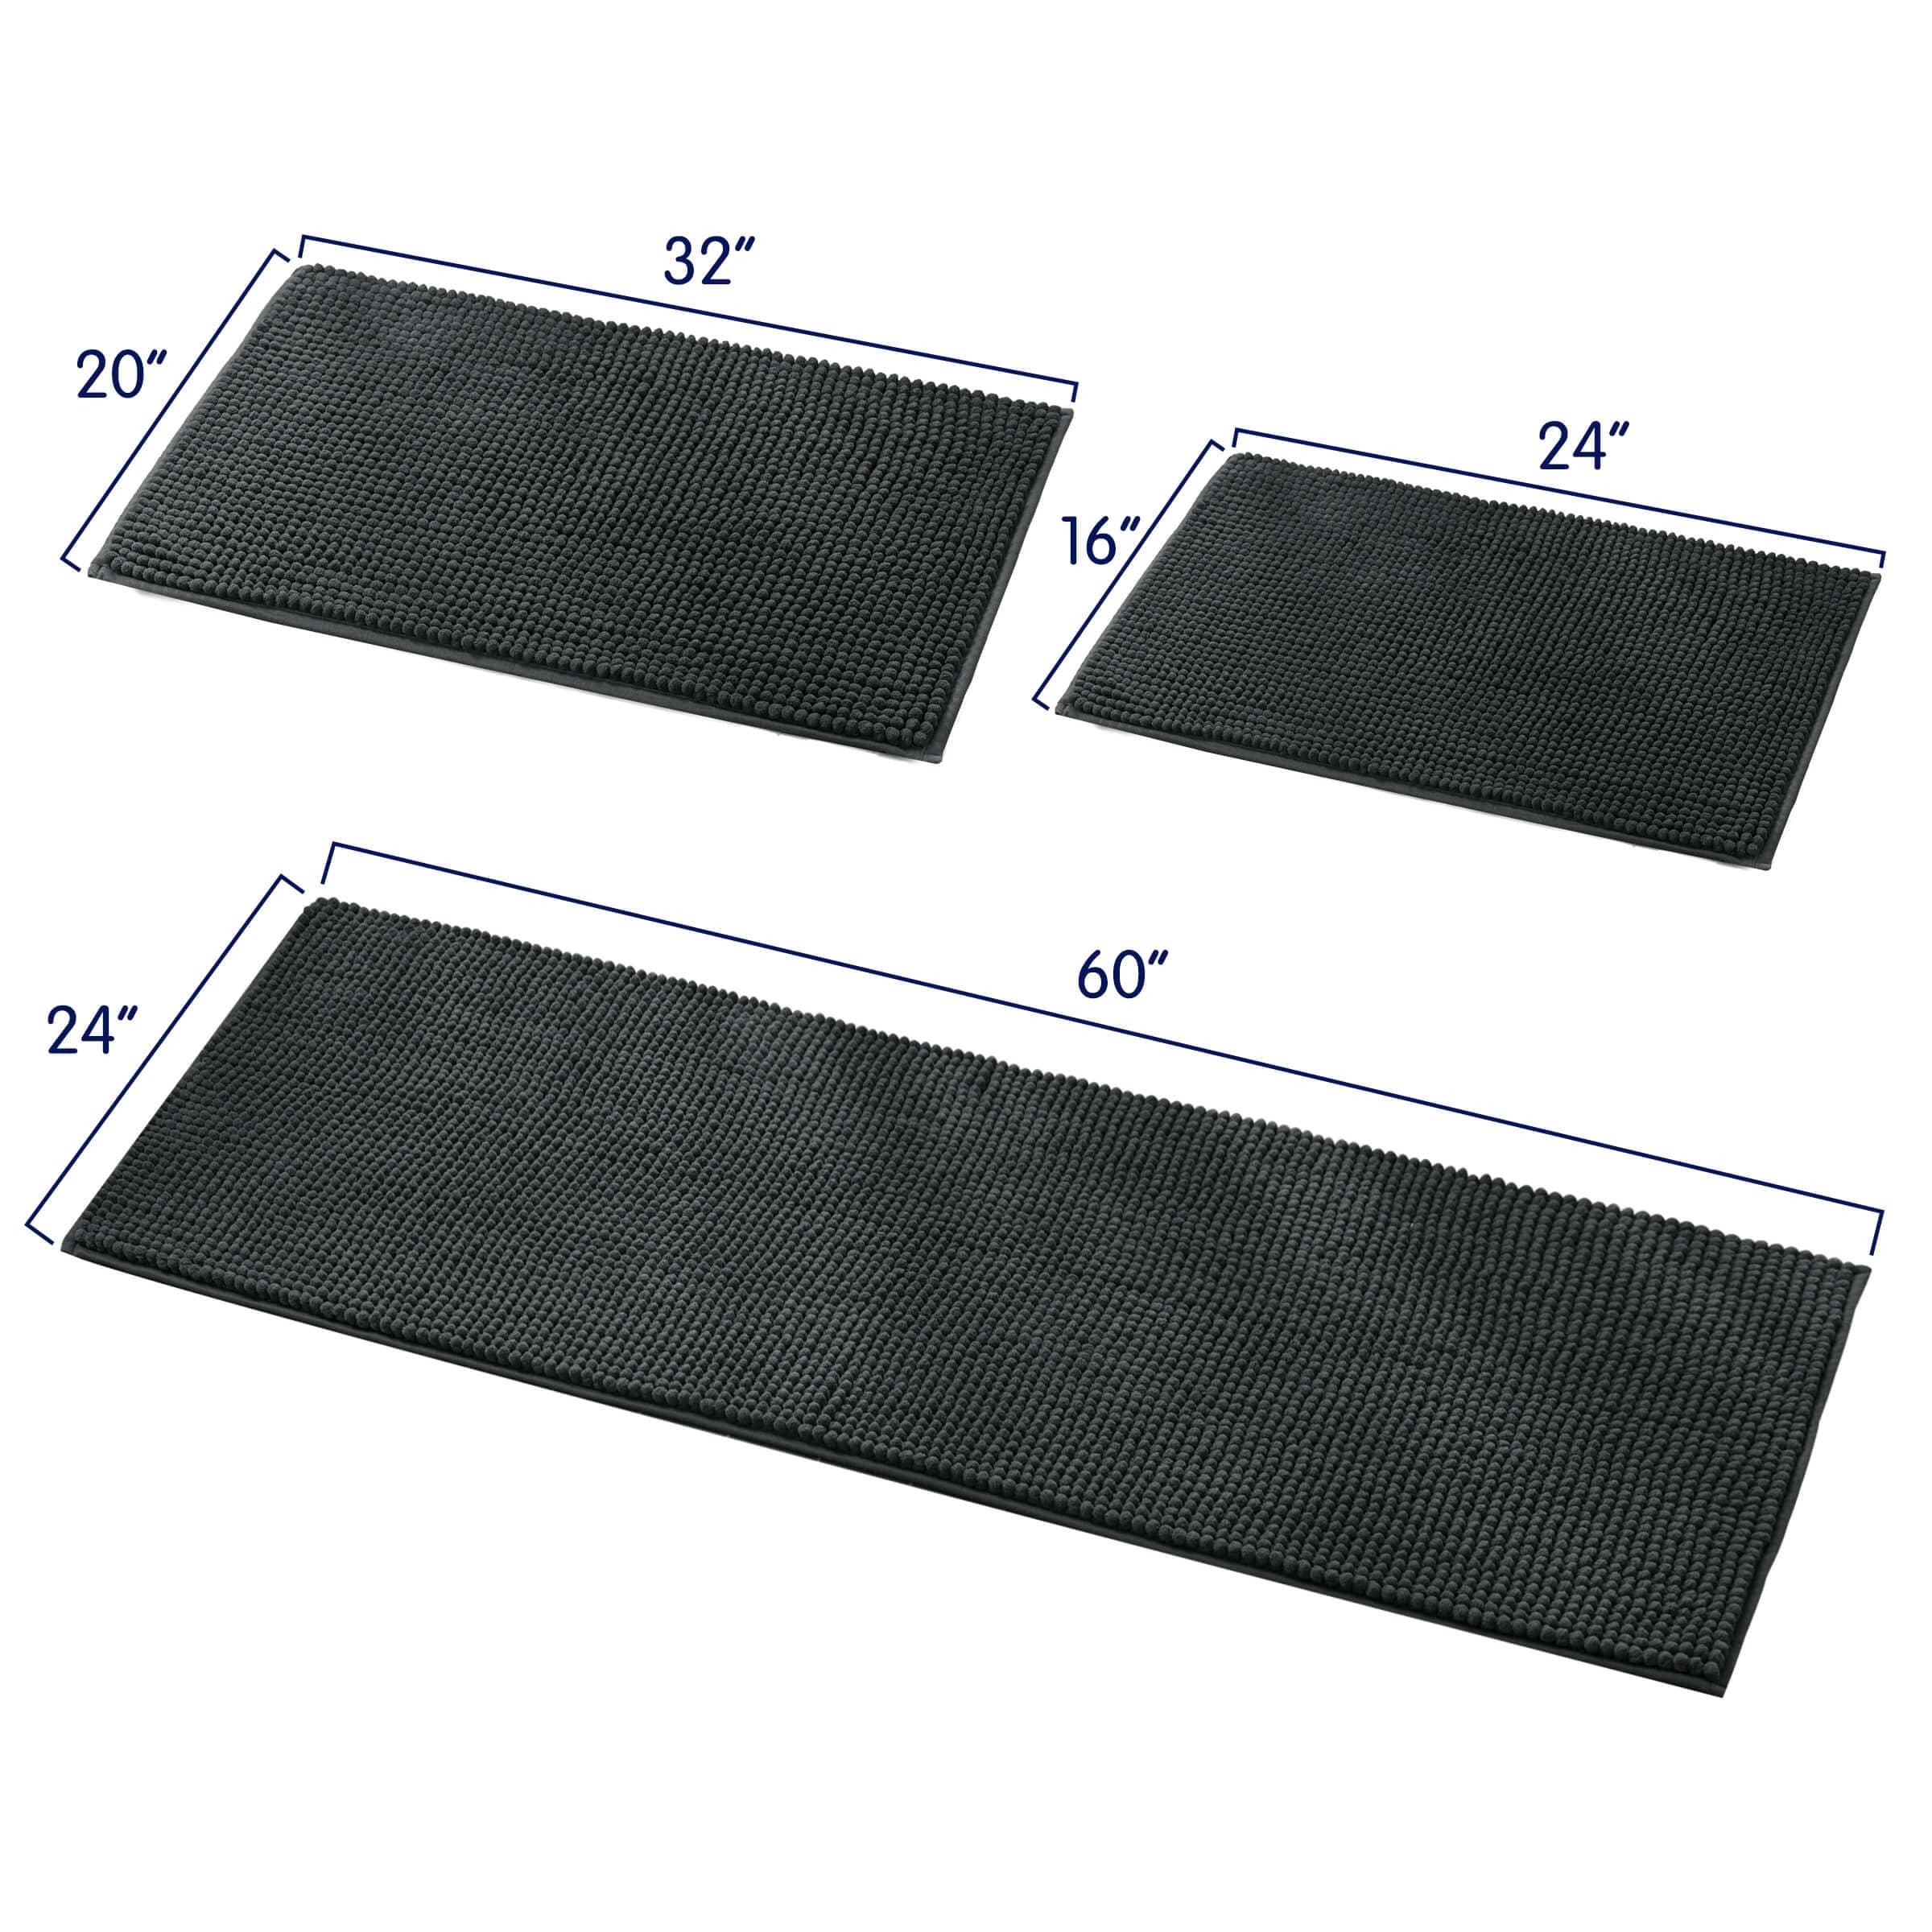 https://ak1.ostkcdn.com/images/products/is/images/direct/cac9a96544e1914271091a4b92adc10bf1b9cd5d/Subrtex-Chenille-Bathroom-Rugs-Soft-Super-Water-Absorbing-Shower-Mats.jpg